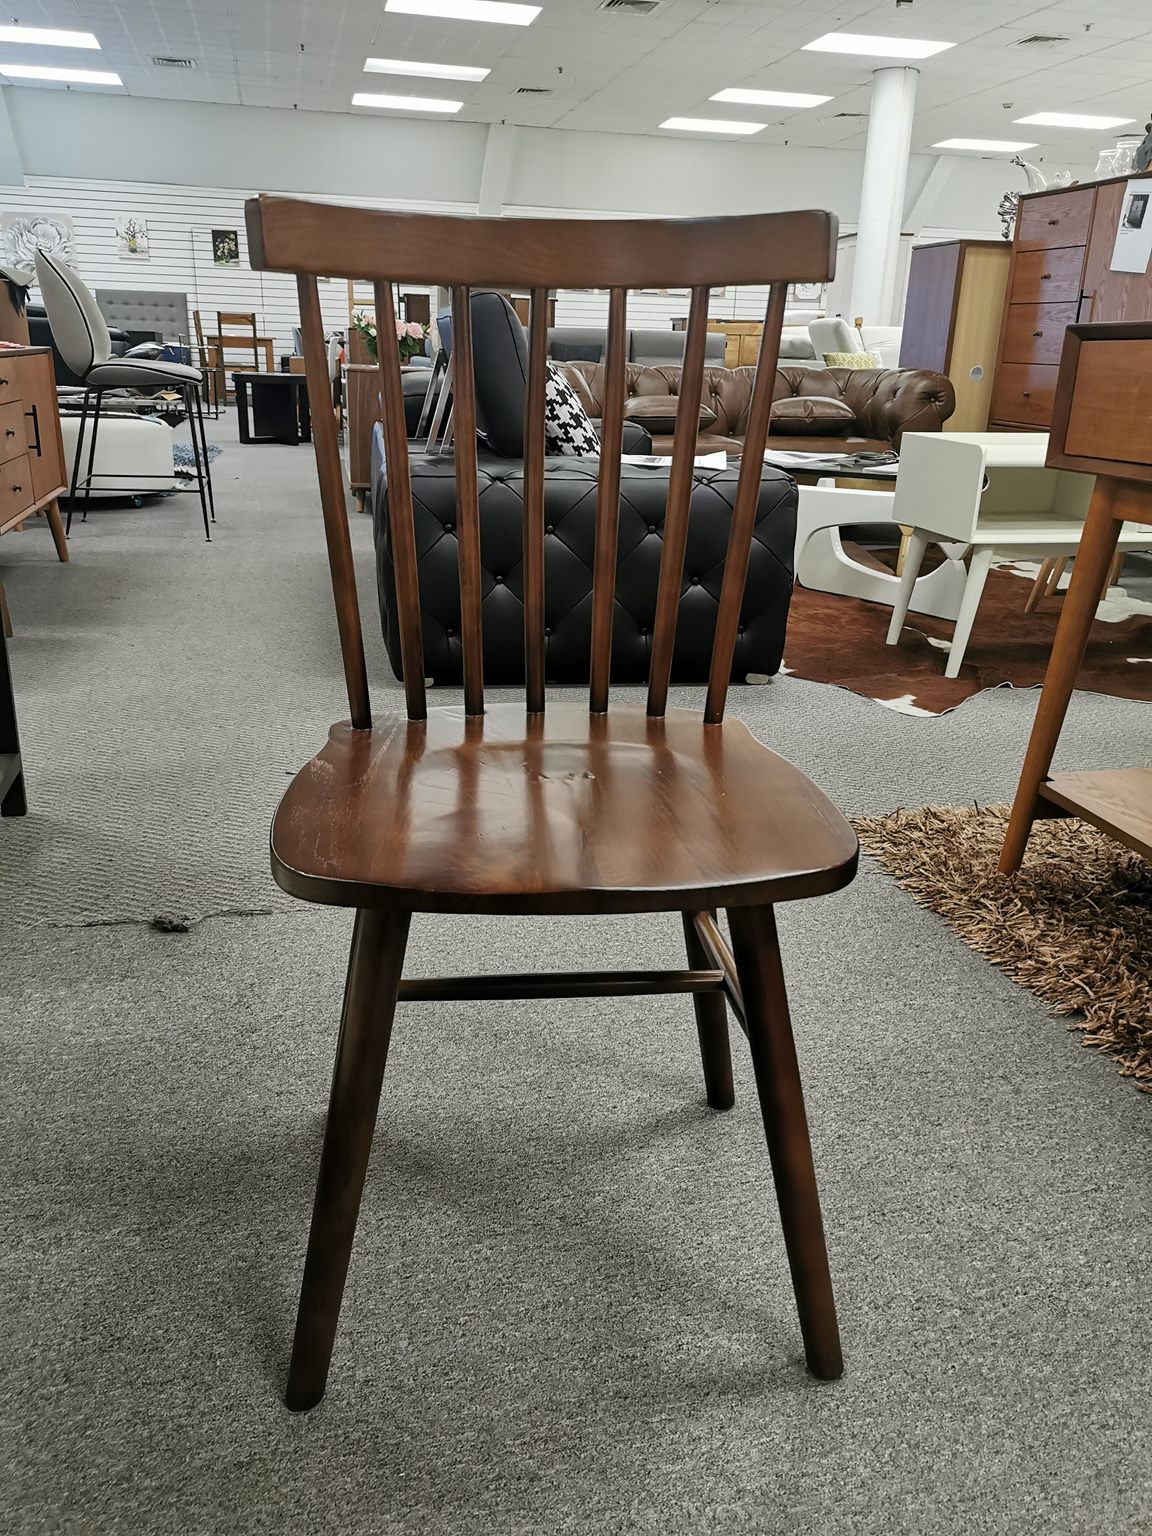 Solid ash Windsor Chair,  dark color available *Special*